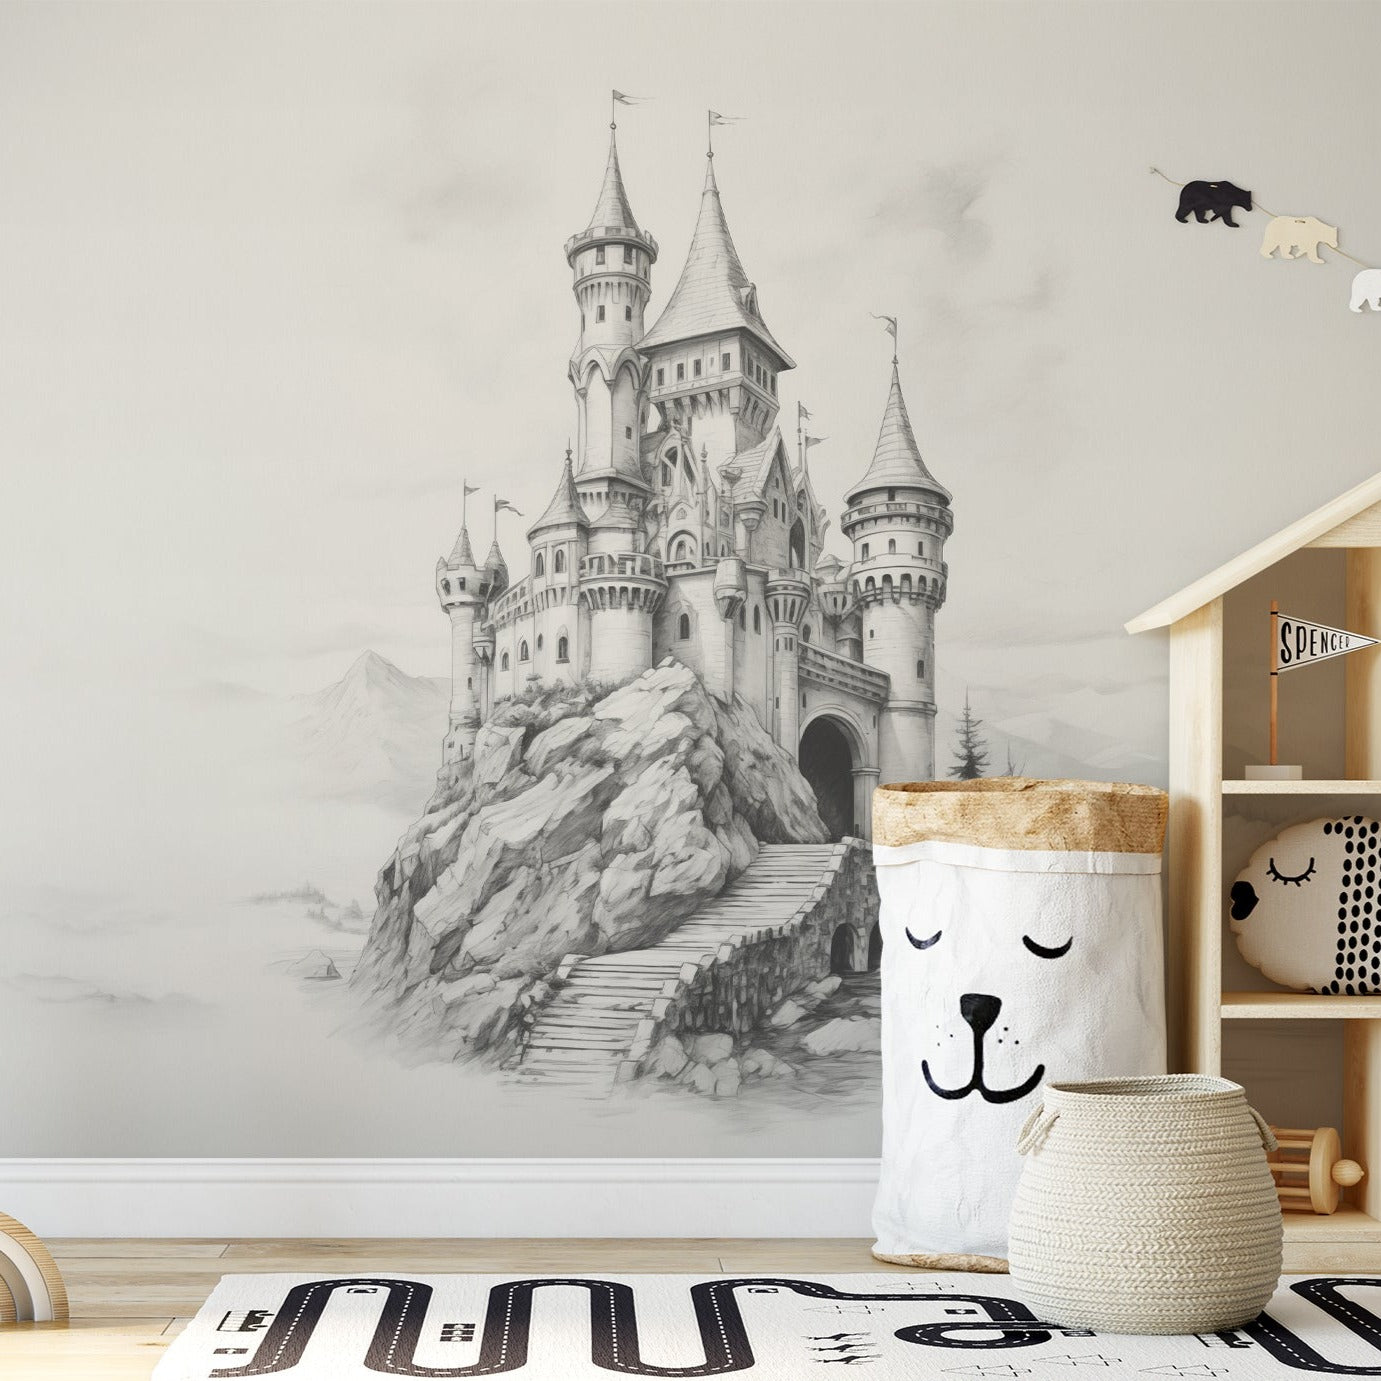 Cloud Castle wallpaper mural in a child's room with a bunny chair, toy storage, and play area.